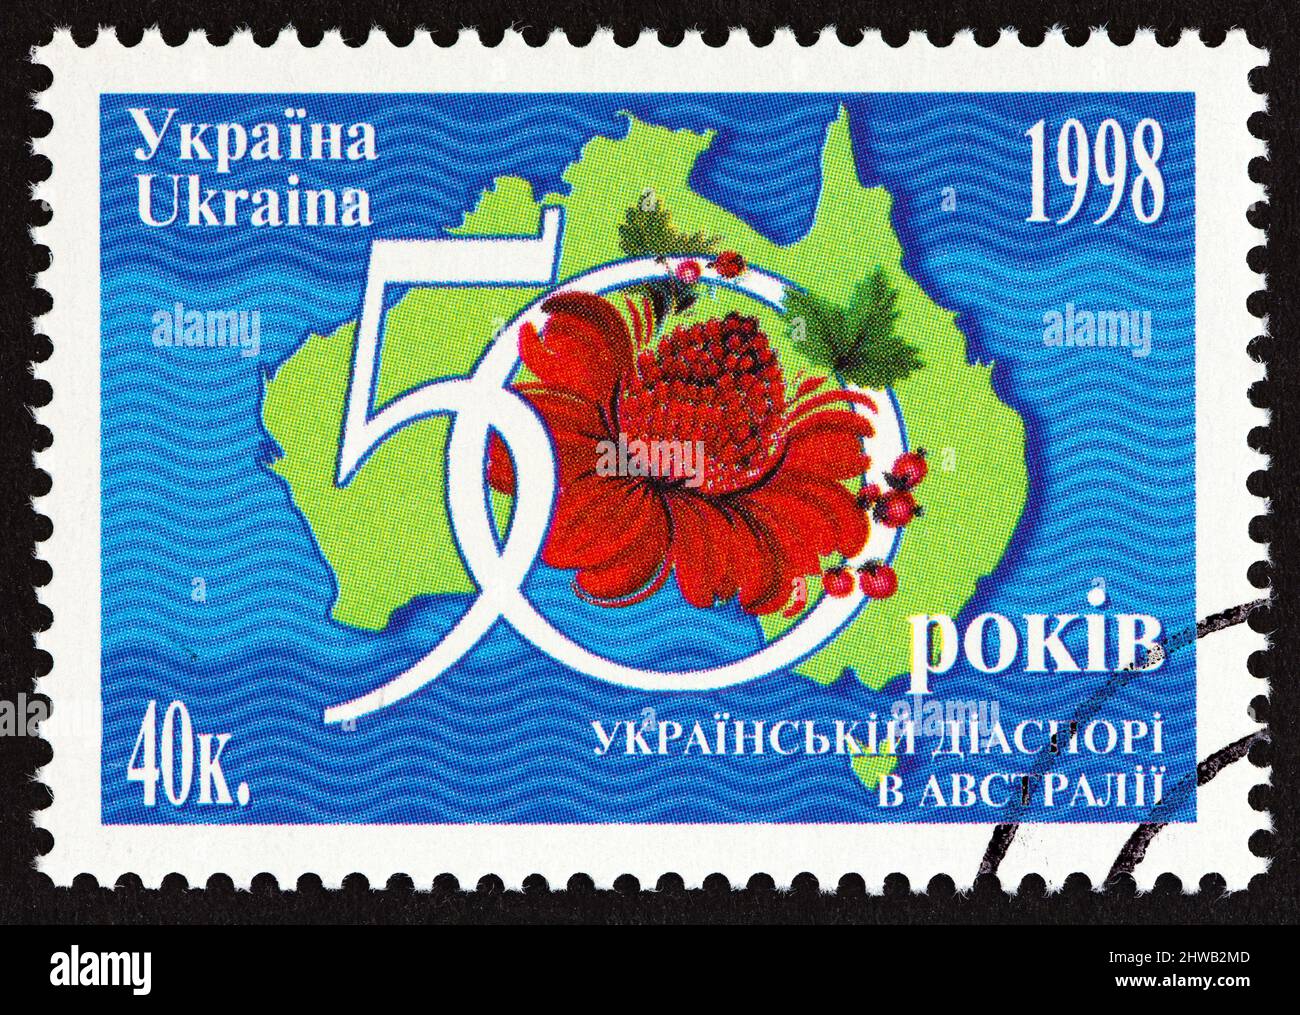 UKRAINE - CIRCA 1998: A stamp printed in Ukraine issued for the 50th anniversary of Ukrainians in Australia shows map of Australia and Waratah. Stock Photo